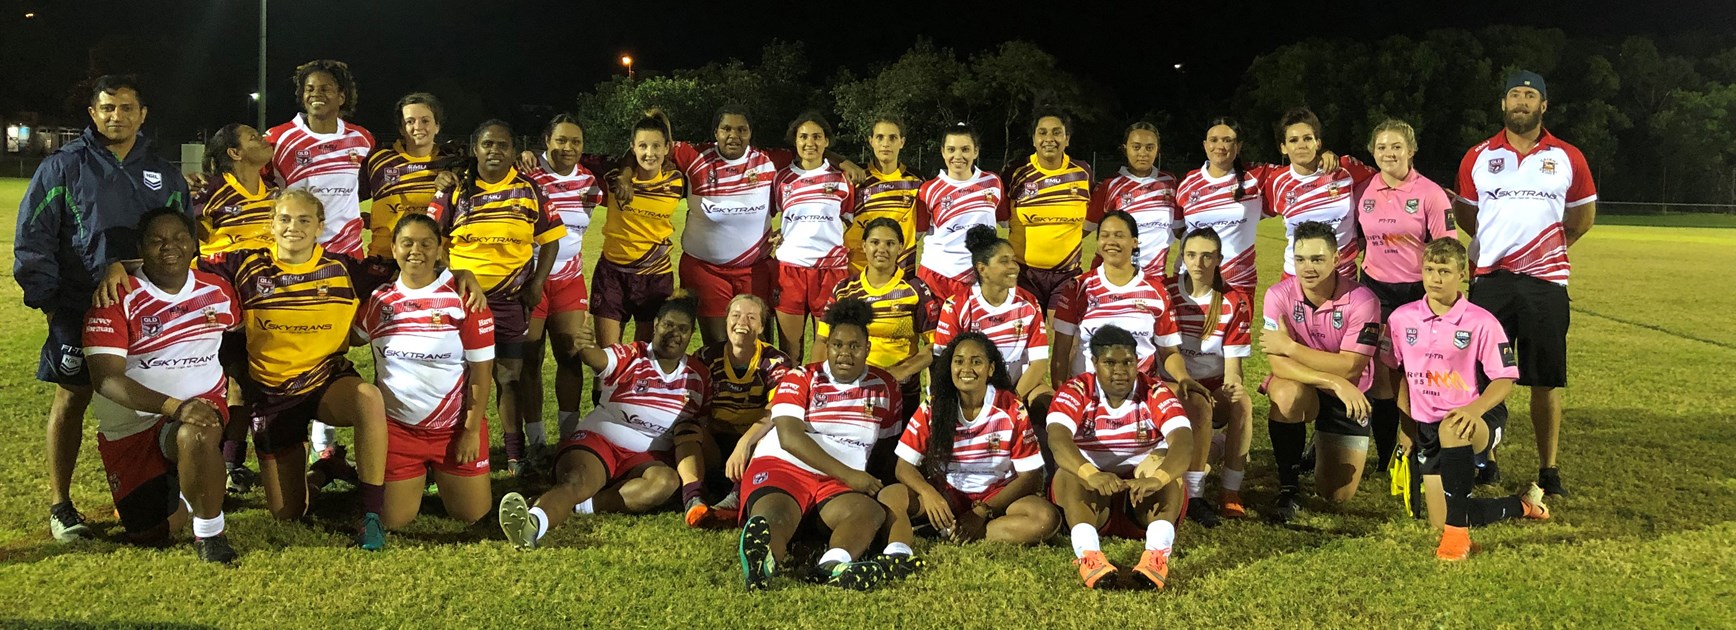 A bright future for female rugby league in the north